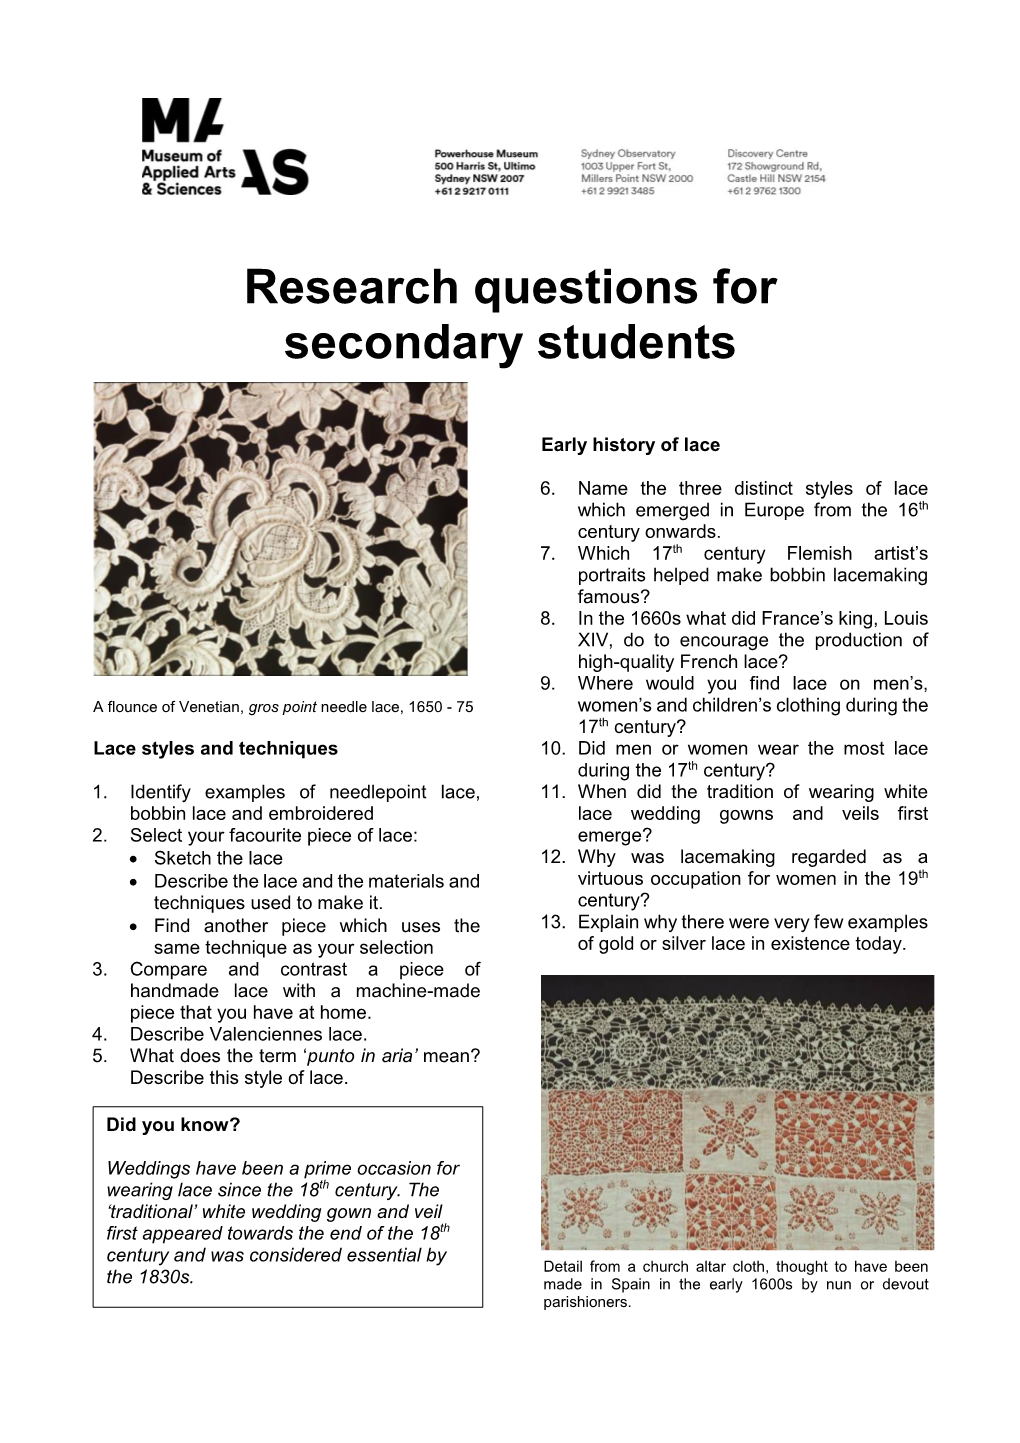 Research Questions for Secondary Students